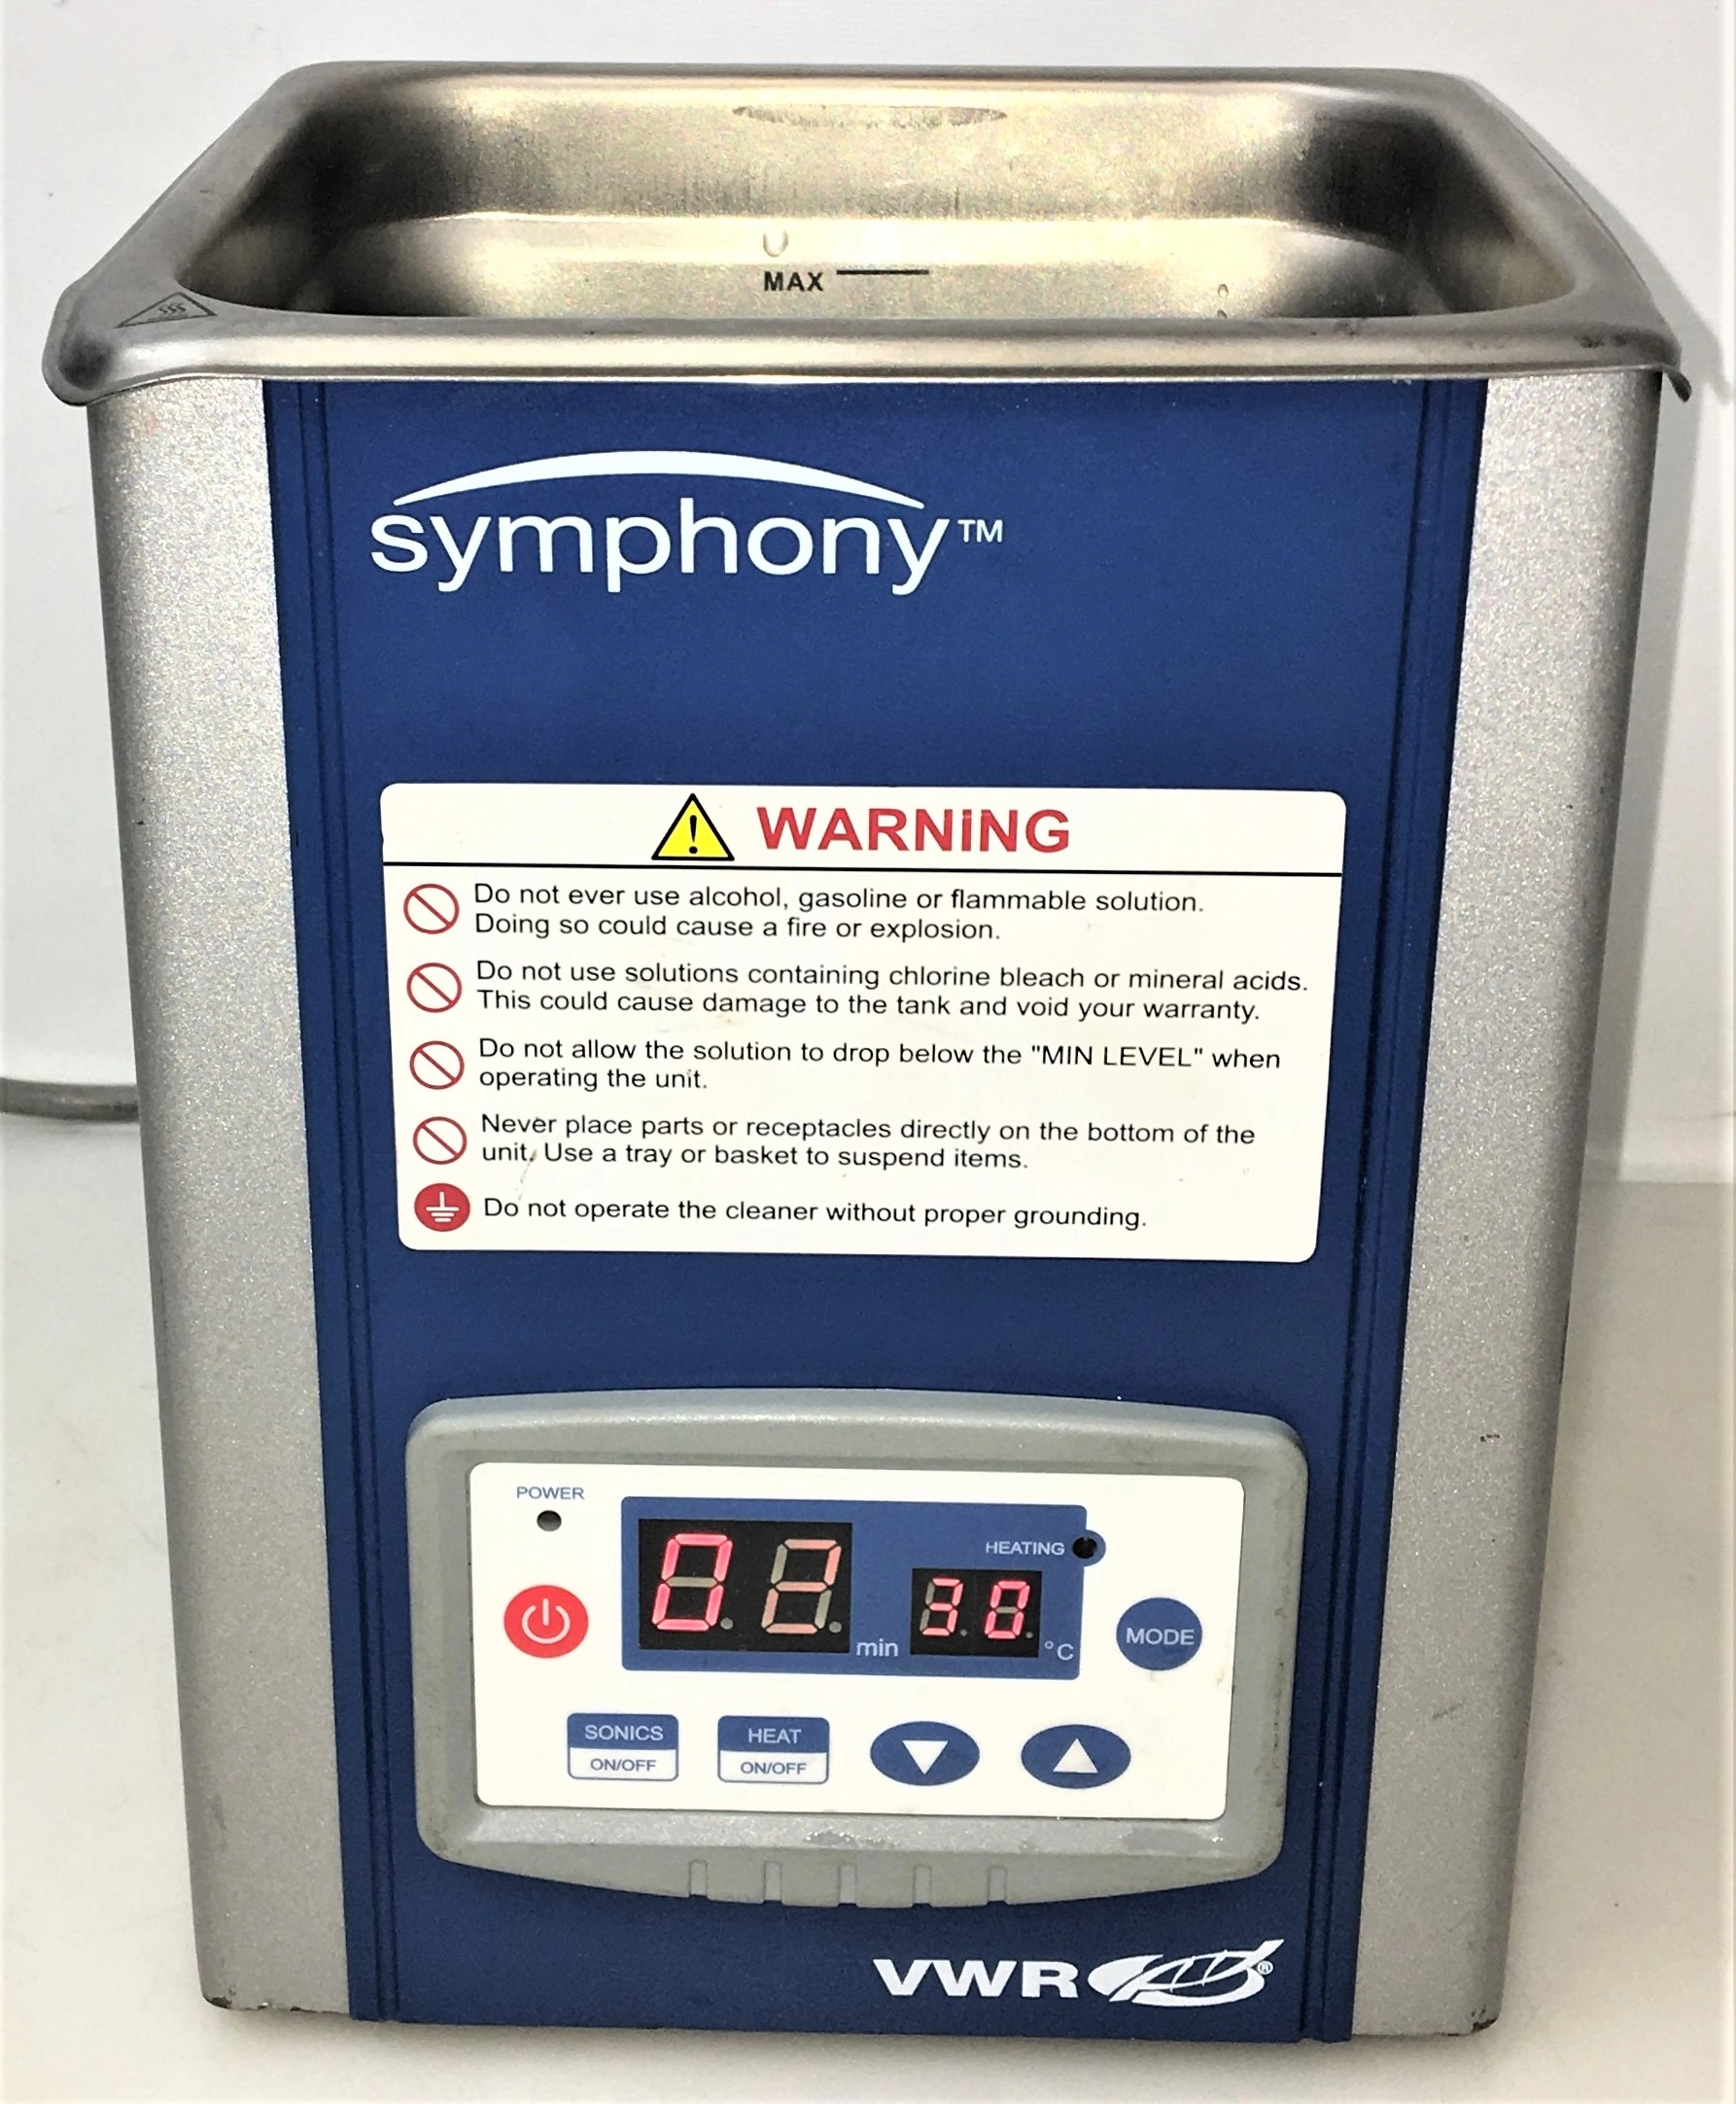 VWR Symphony 97043-988 Ultrasonic Cleaner with Digital Timer and Heater - 1.9L